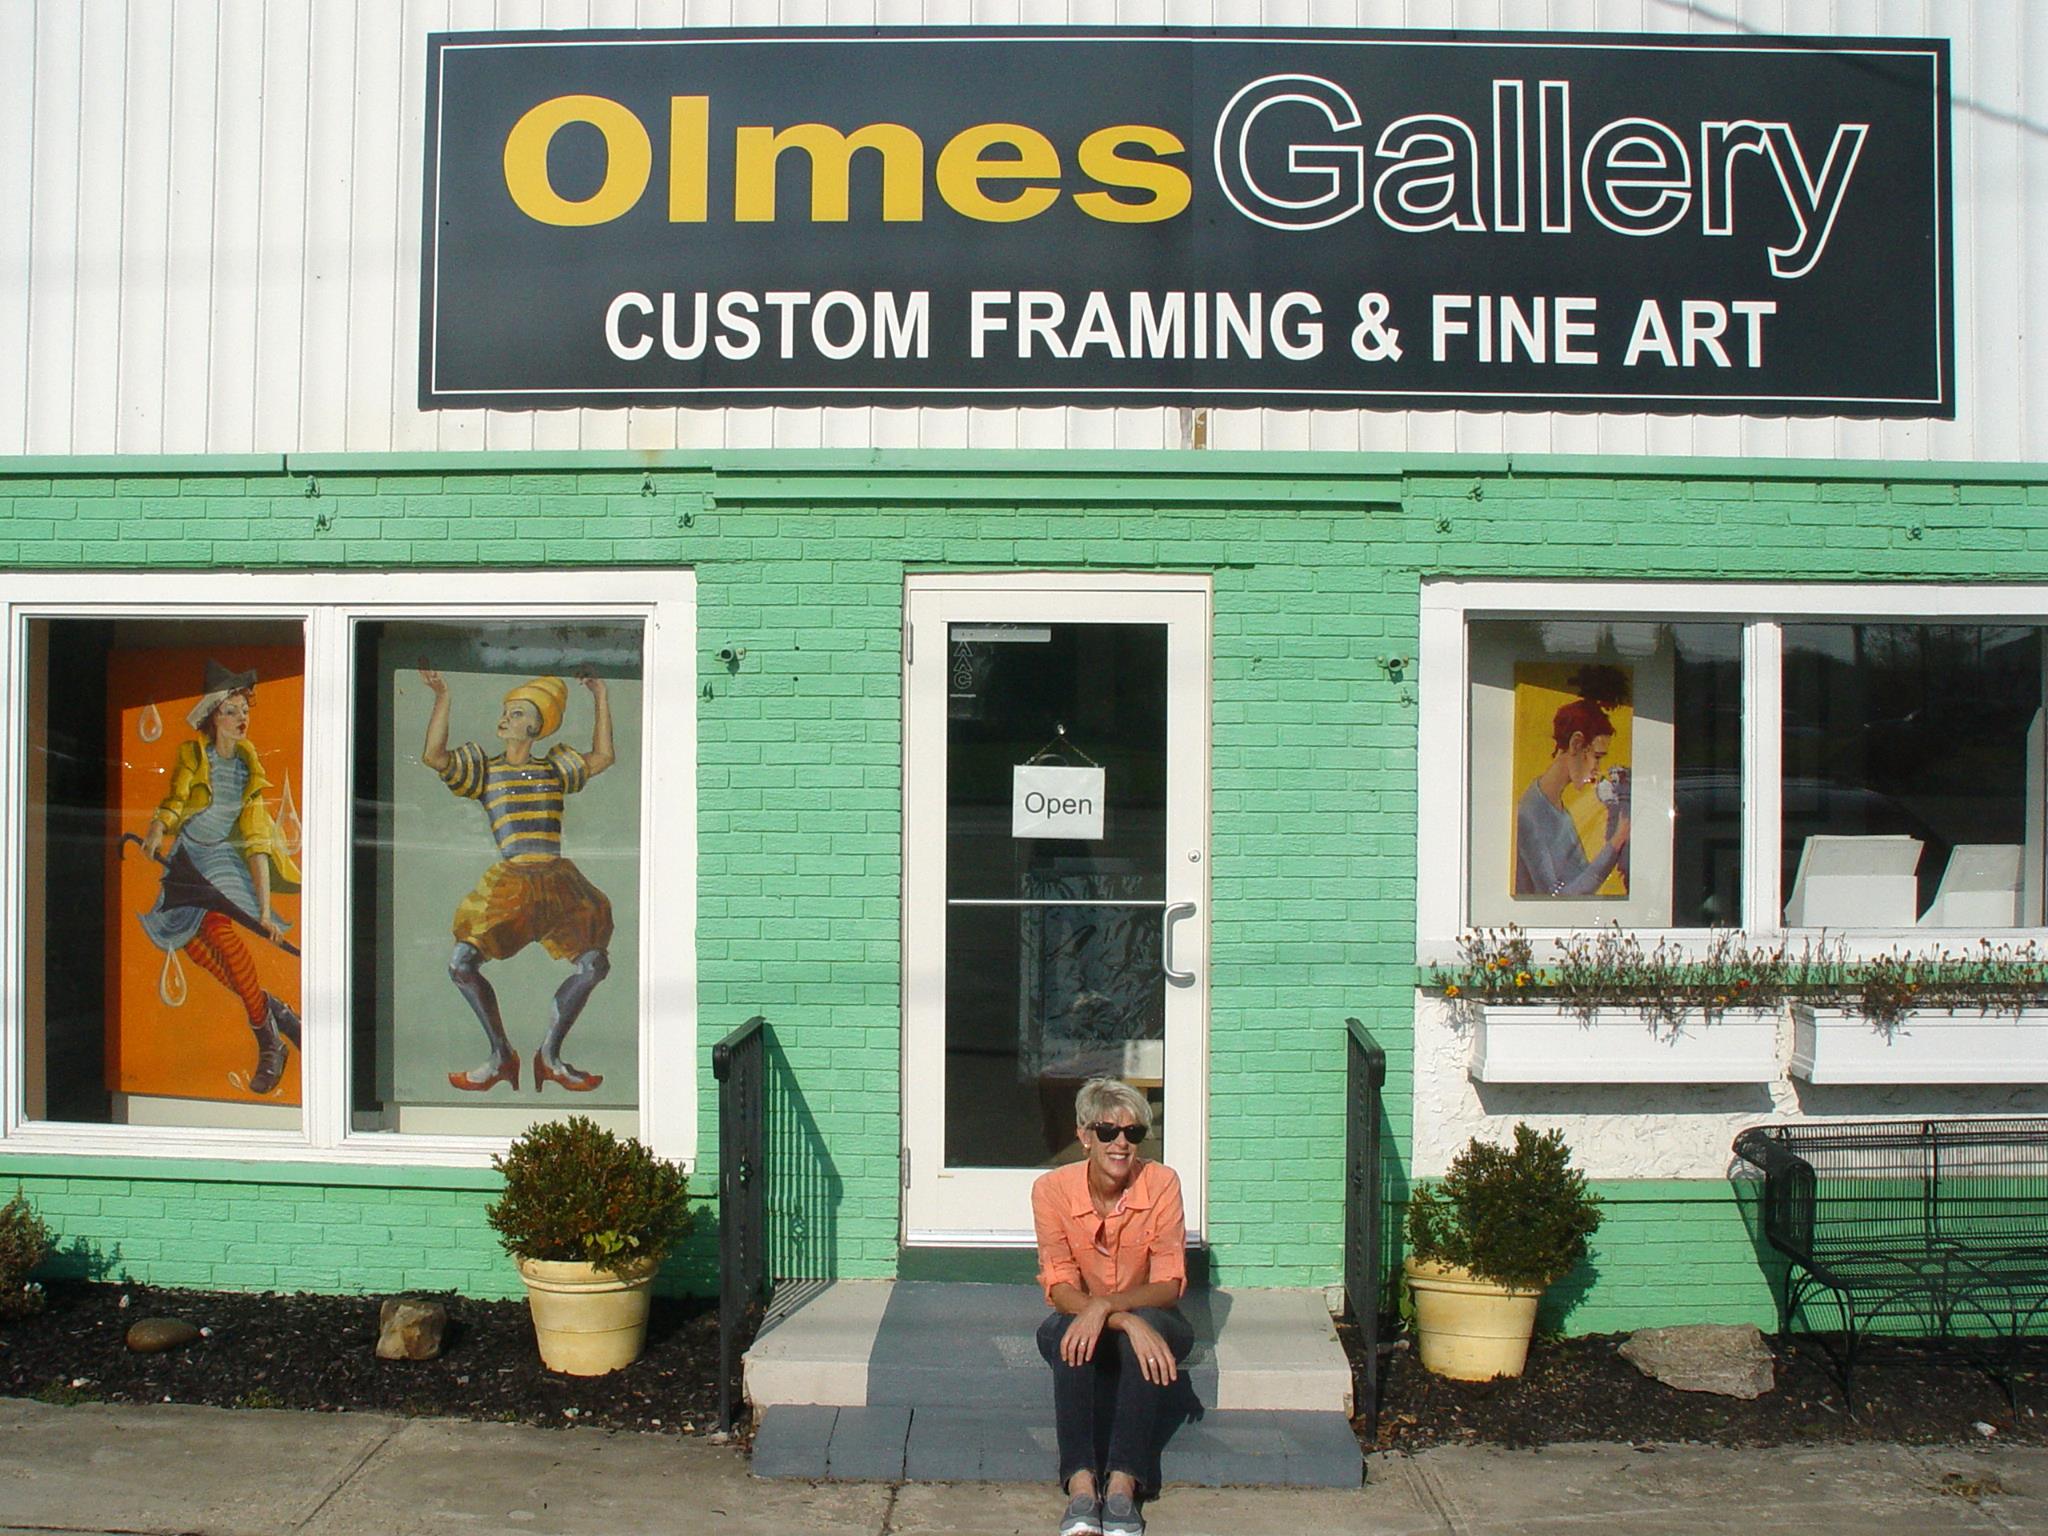 Olmes Gallery